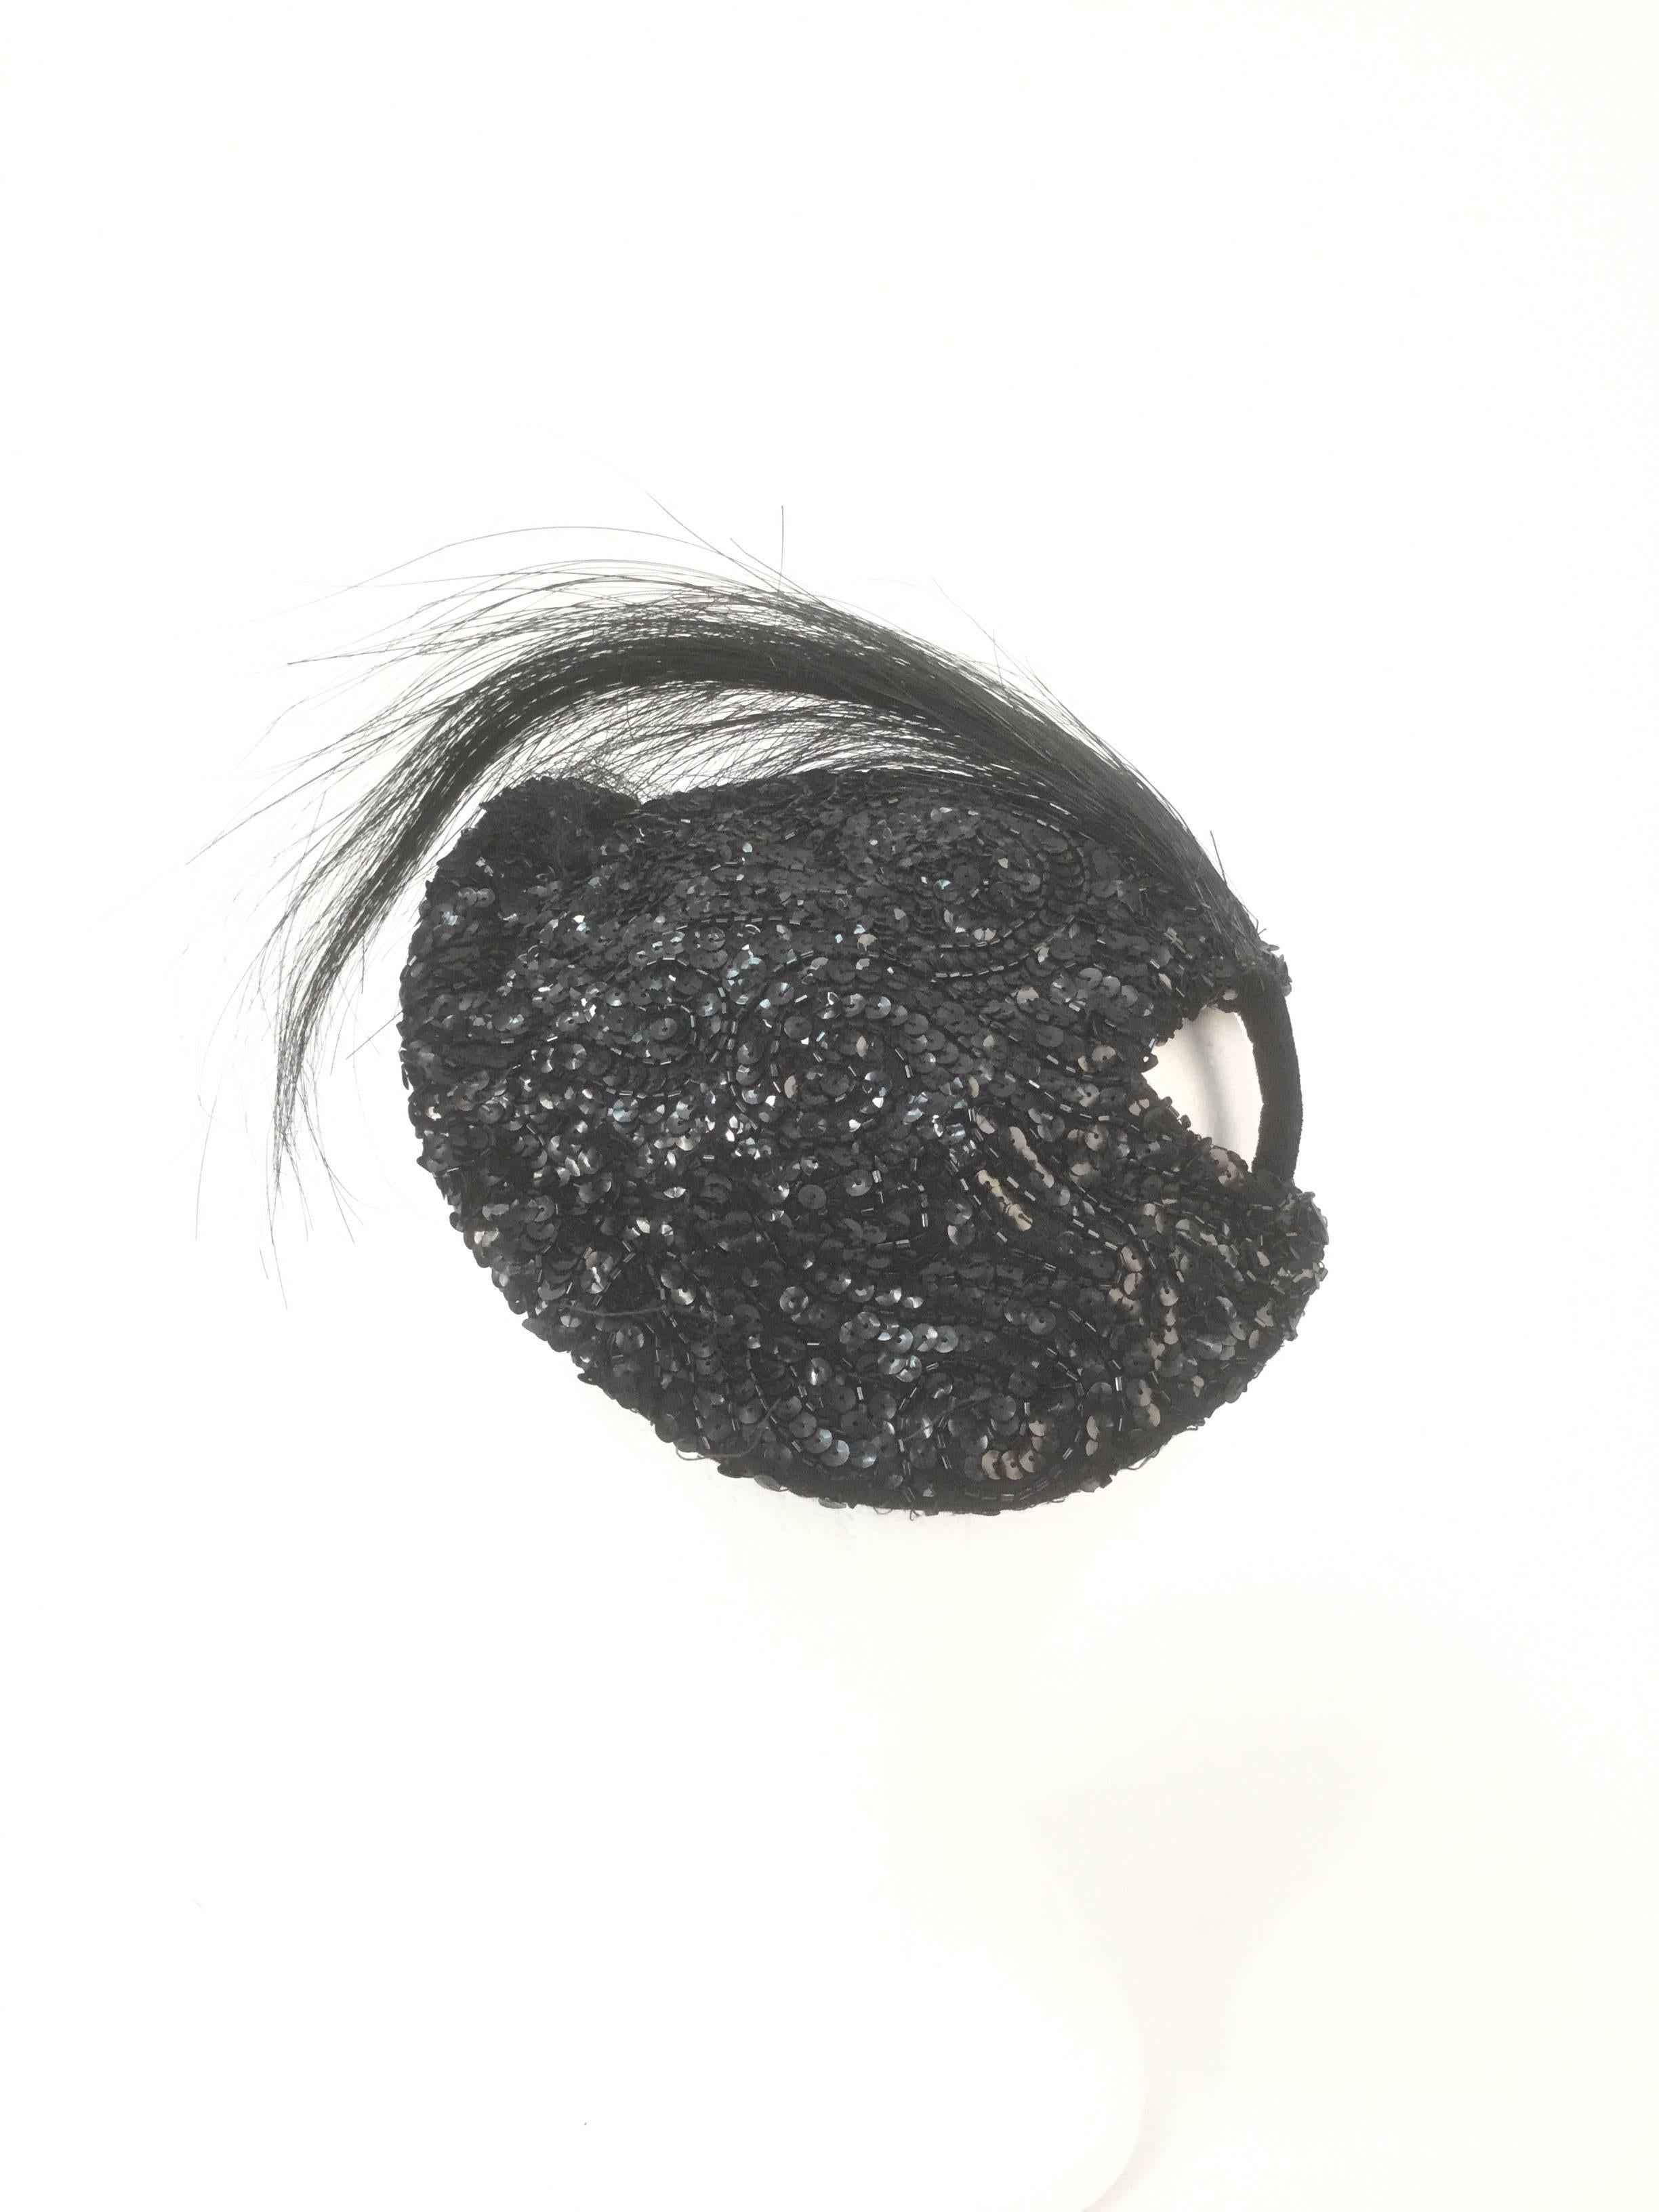 Stunning and glistening, this gorgeous Milgrim hat is sequined and beaded in a swirl of forms. The hat features a bouquet of burn ostrich feathers affixed to the hat via a velvet base. The hat has a mesh lining with a grosgrain ribbon, and sits